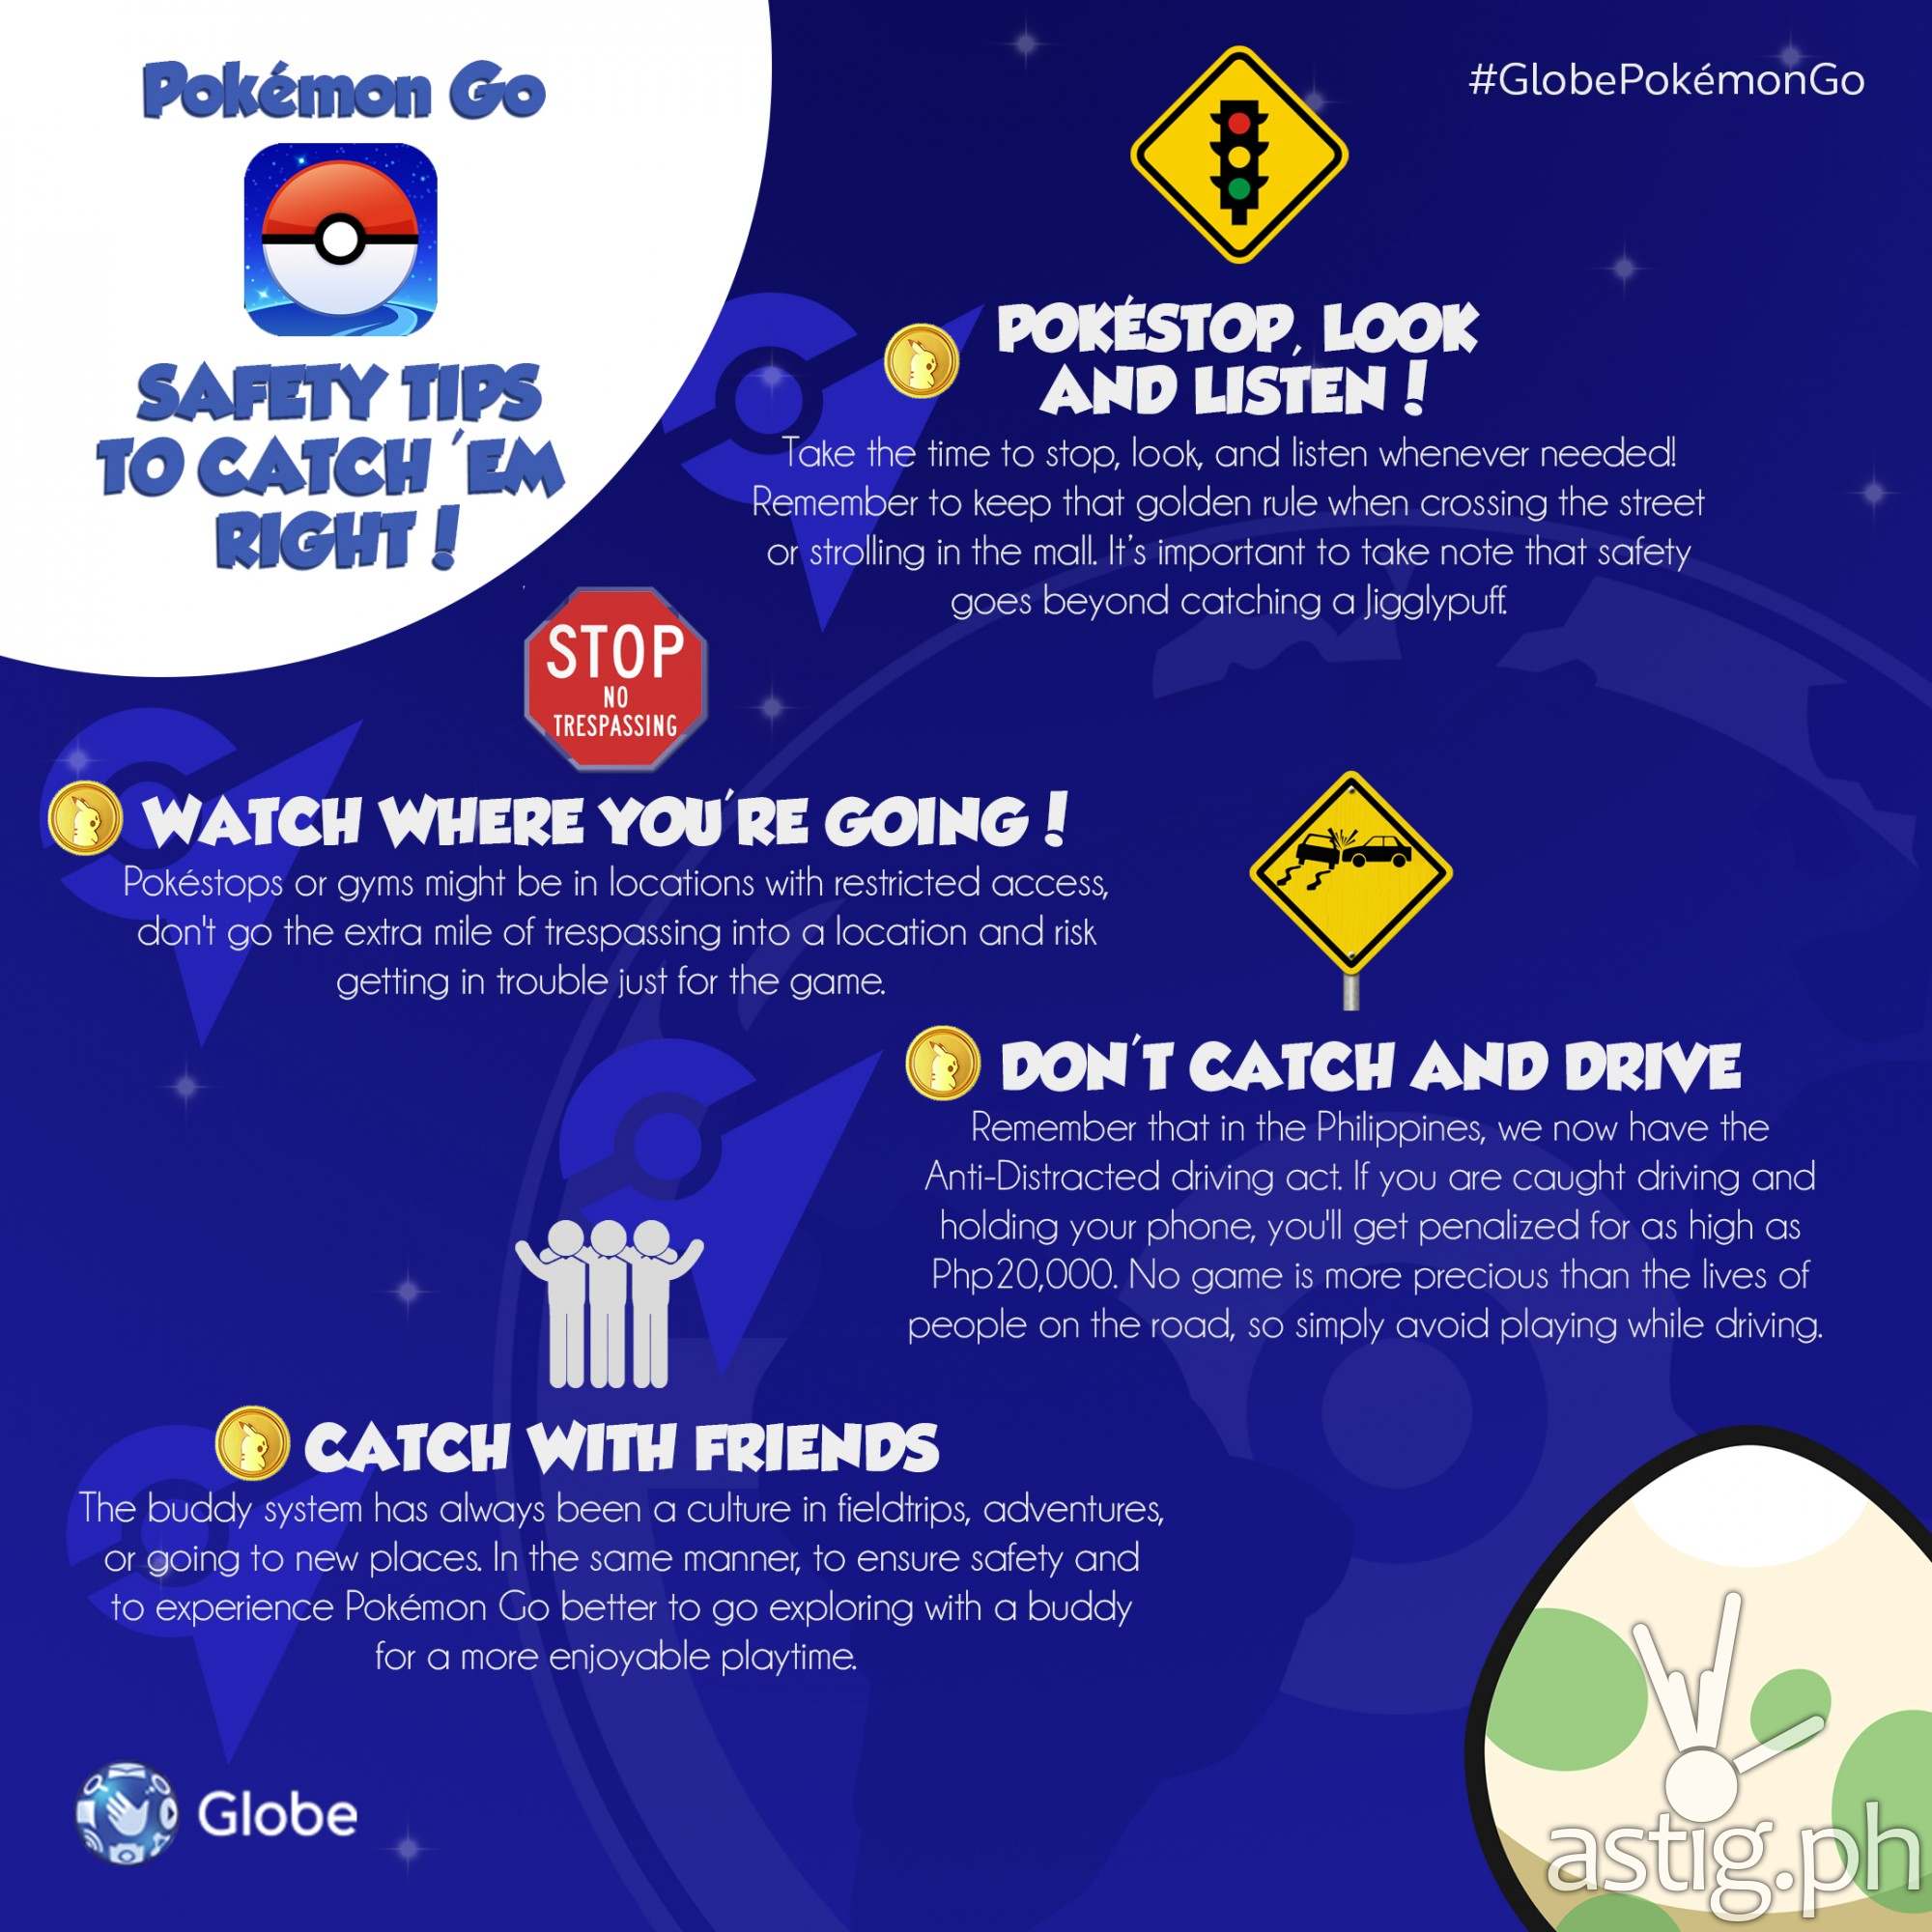 Play Pokemon GO free in the Philippines [infographic]